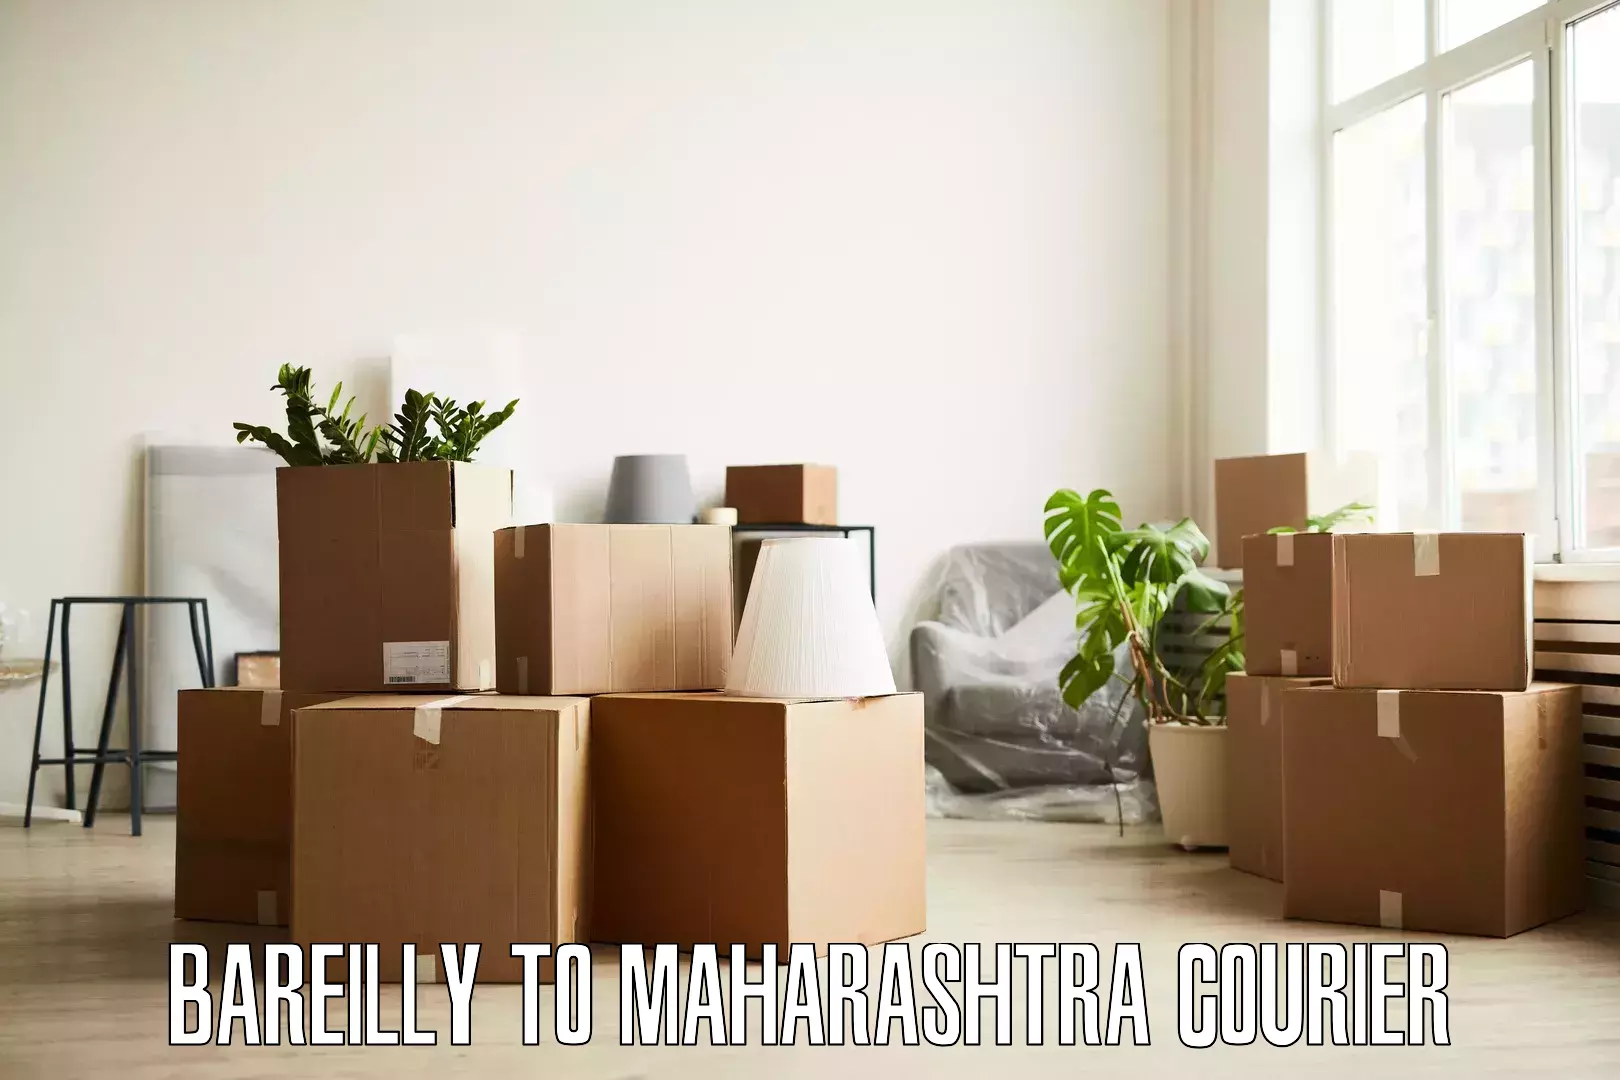 Specialized moving company Bareilly to Andheri